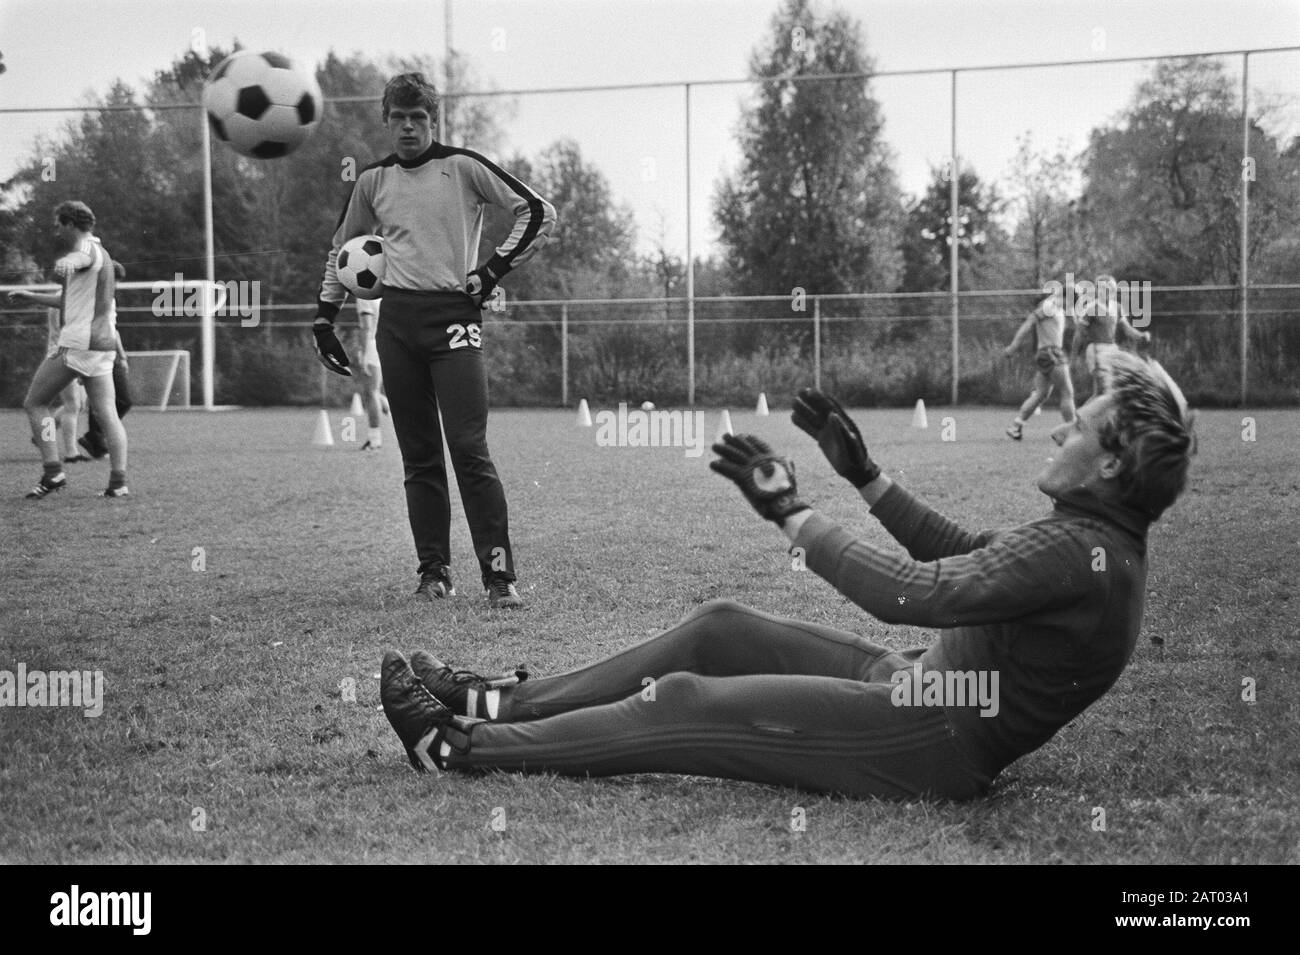 Training of FC Utrecht in connection with the UEFA cup match next Wednesday  Goalkeeper Van Breukelen during training Date: September 28, 1981 Keywords: goalkeeper, sports, trainings, football Personal name: Breukelen, Hans van Institutioningsname: FC Utrecht Stock Photo